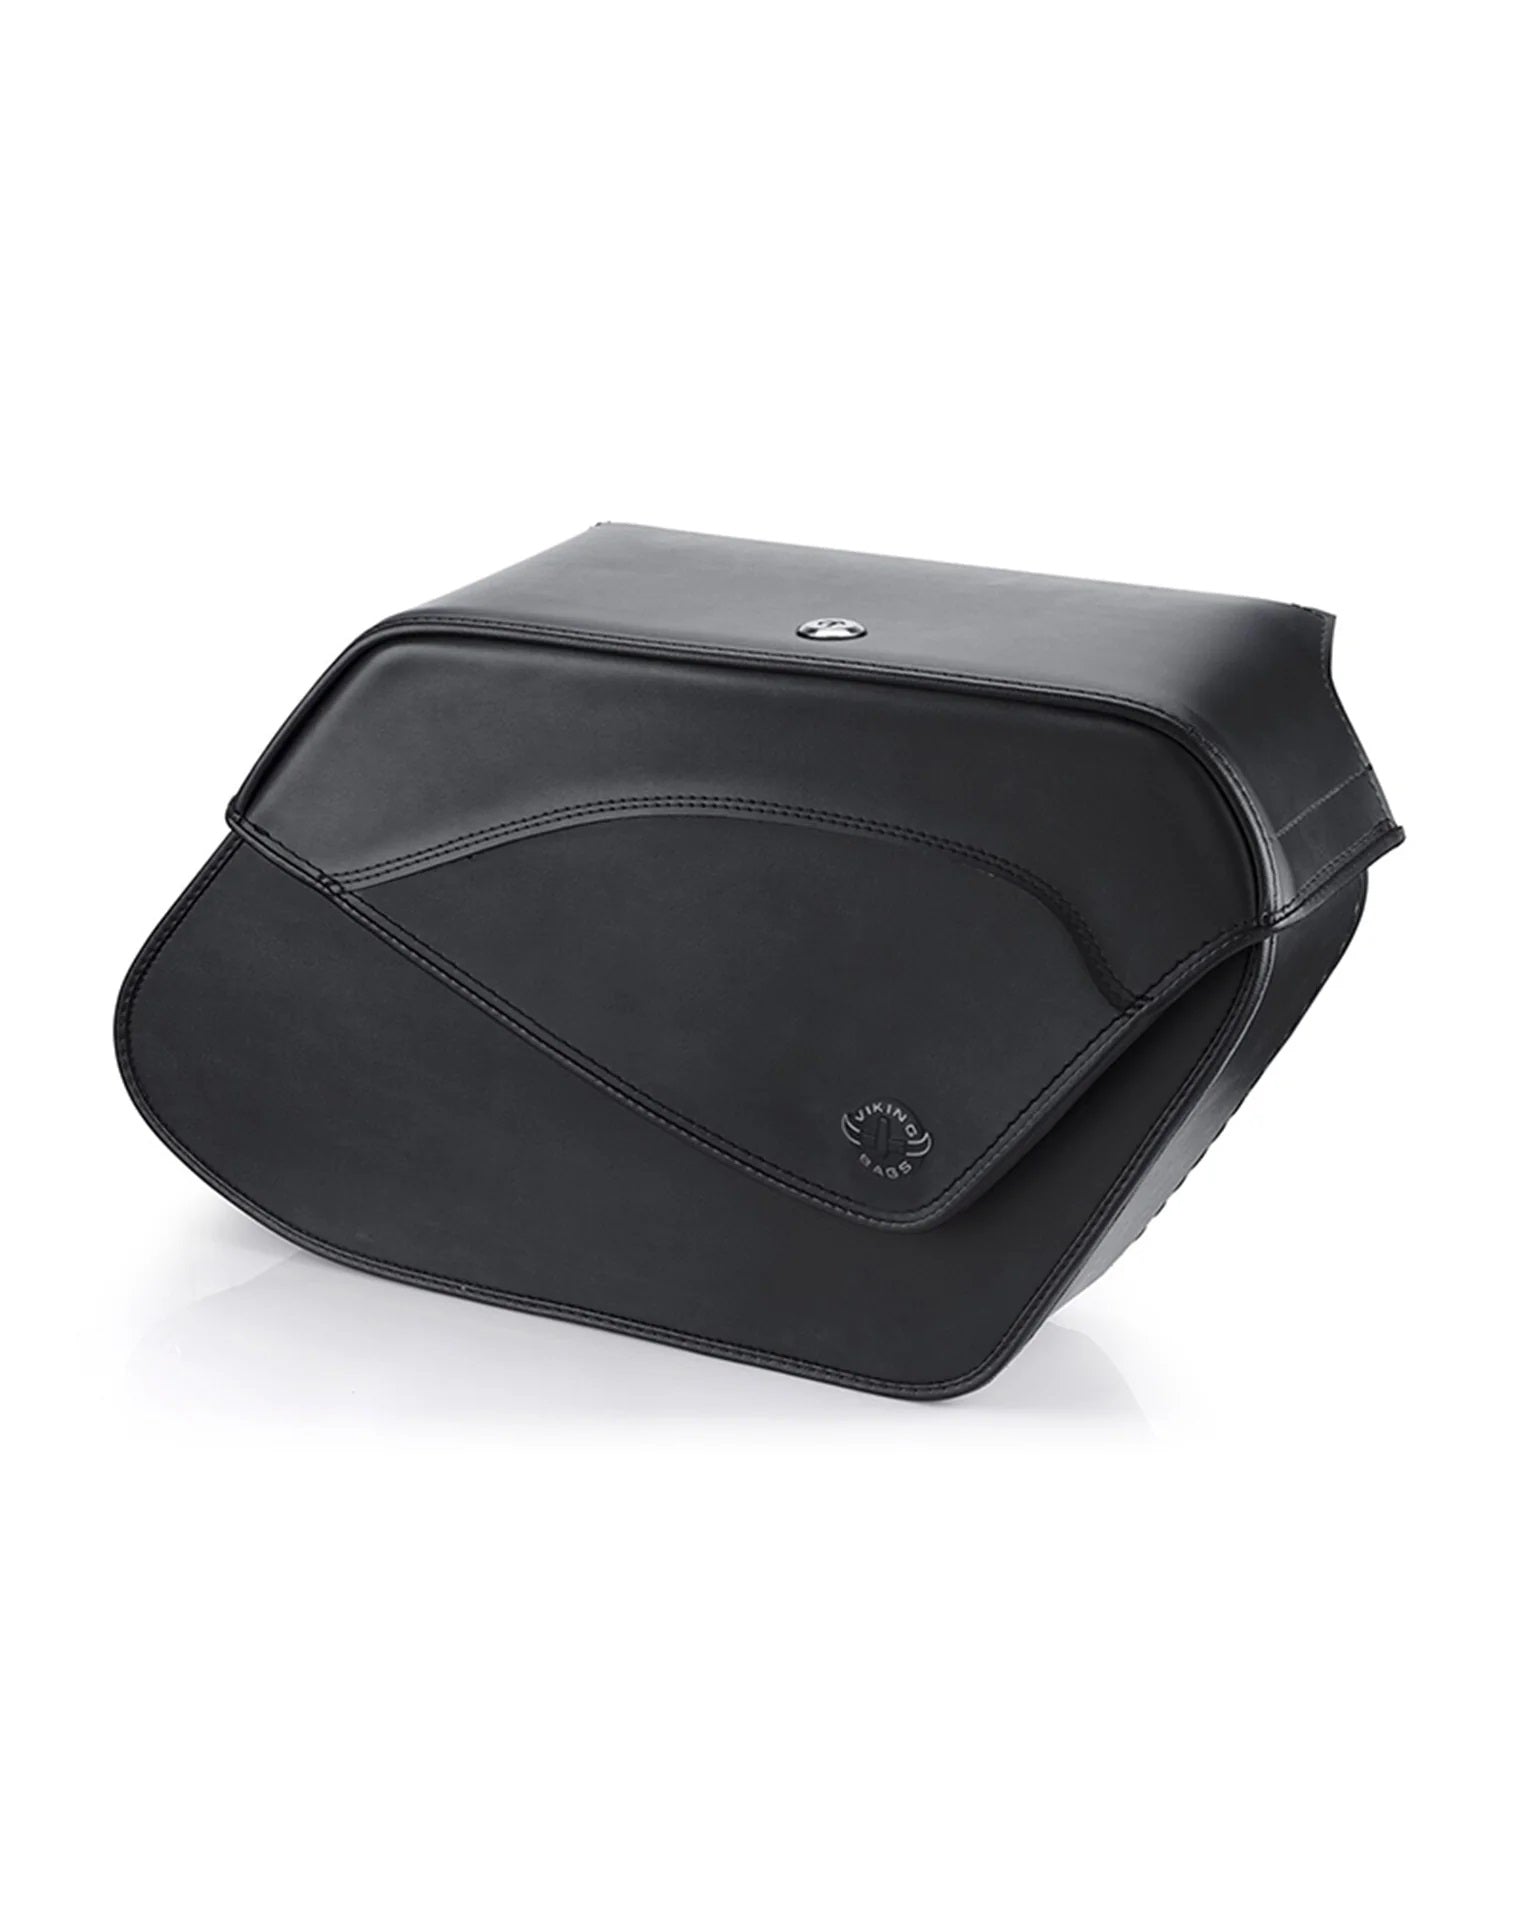 Harley Dyna Low Rider Viking Dyna Specific Large Shock Cut Out Motorcycle Saddlebags Main View